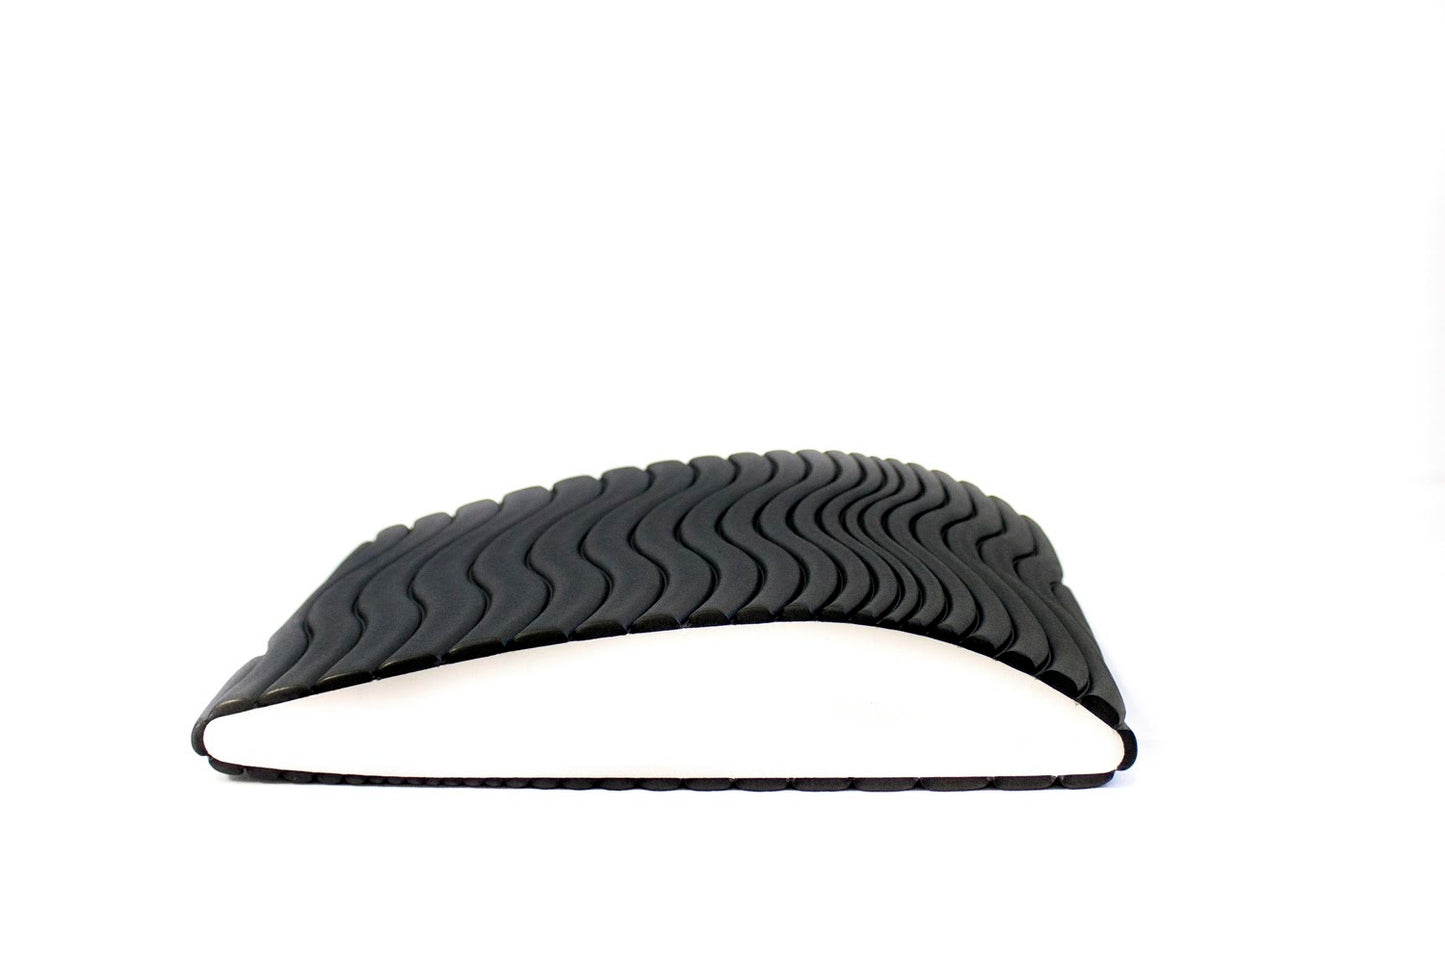 Sit-up and Stretch Pad by YOGA Accessories